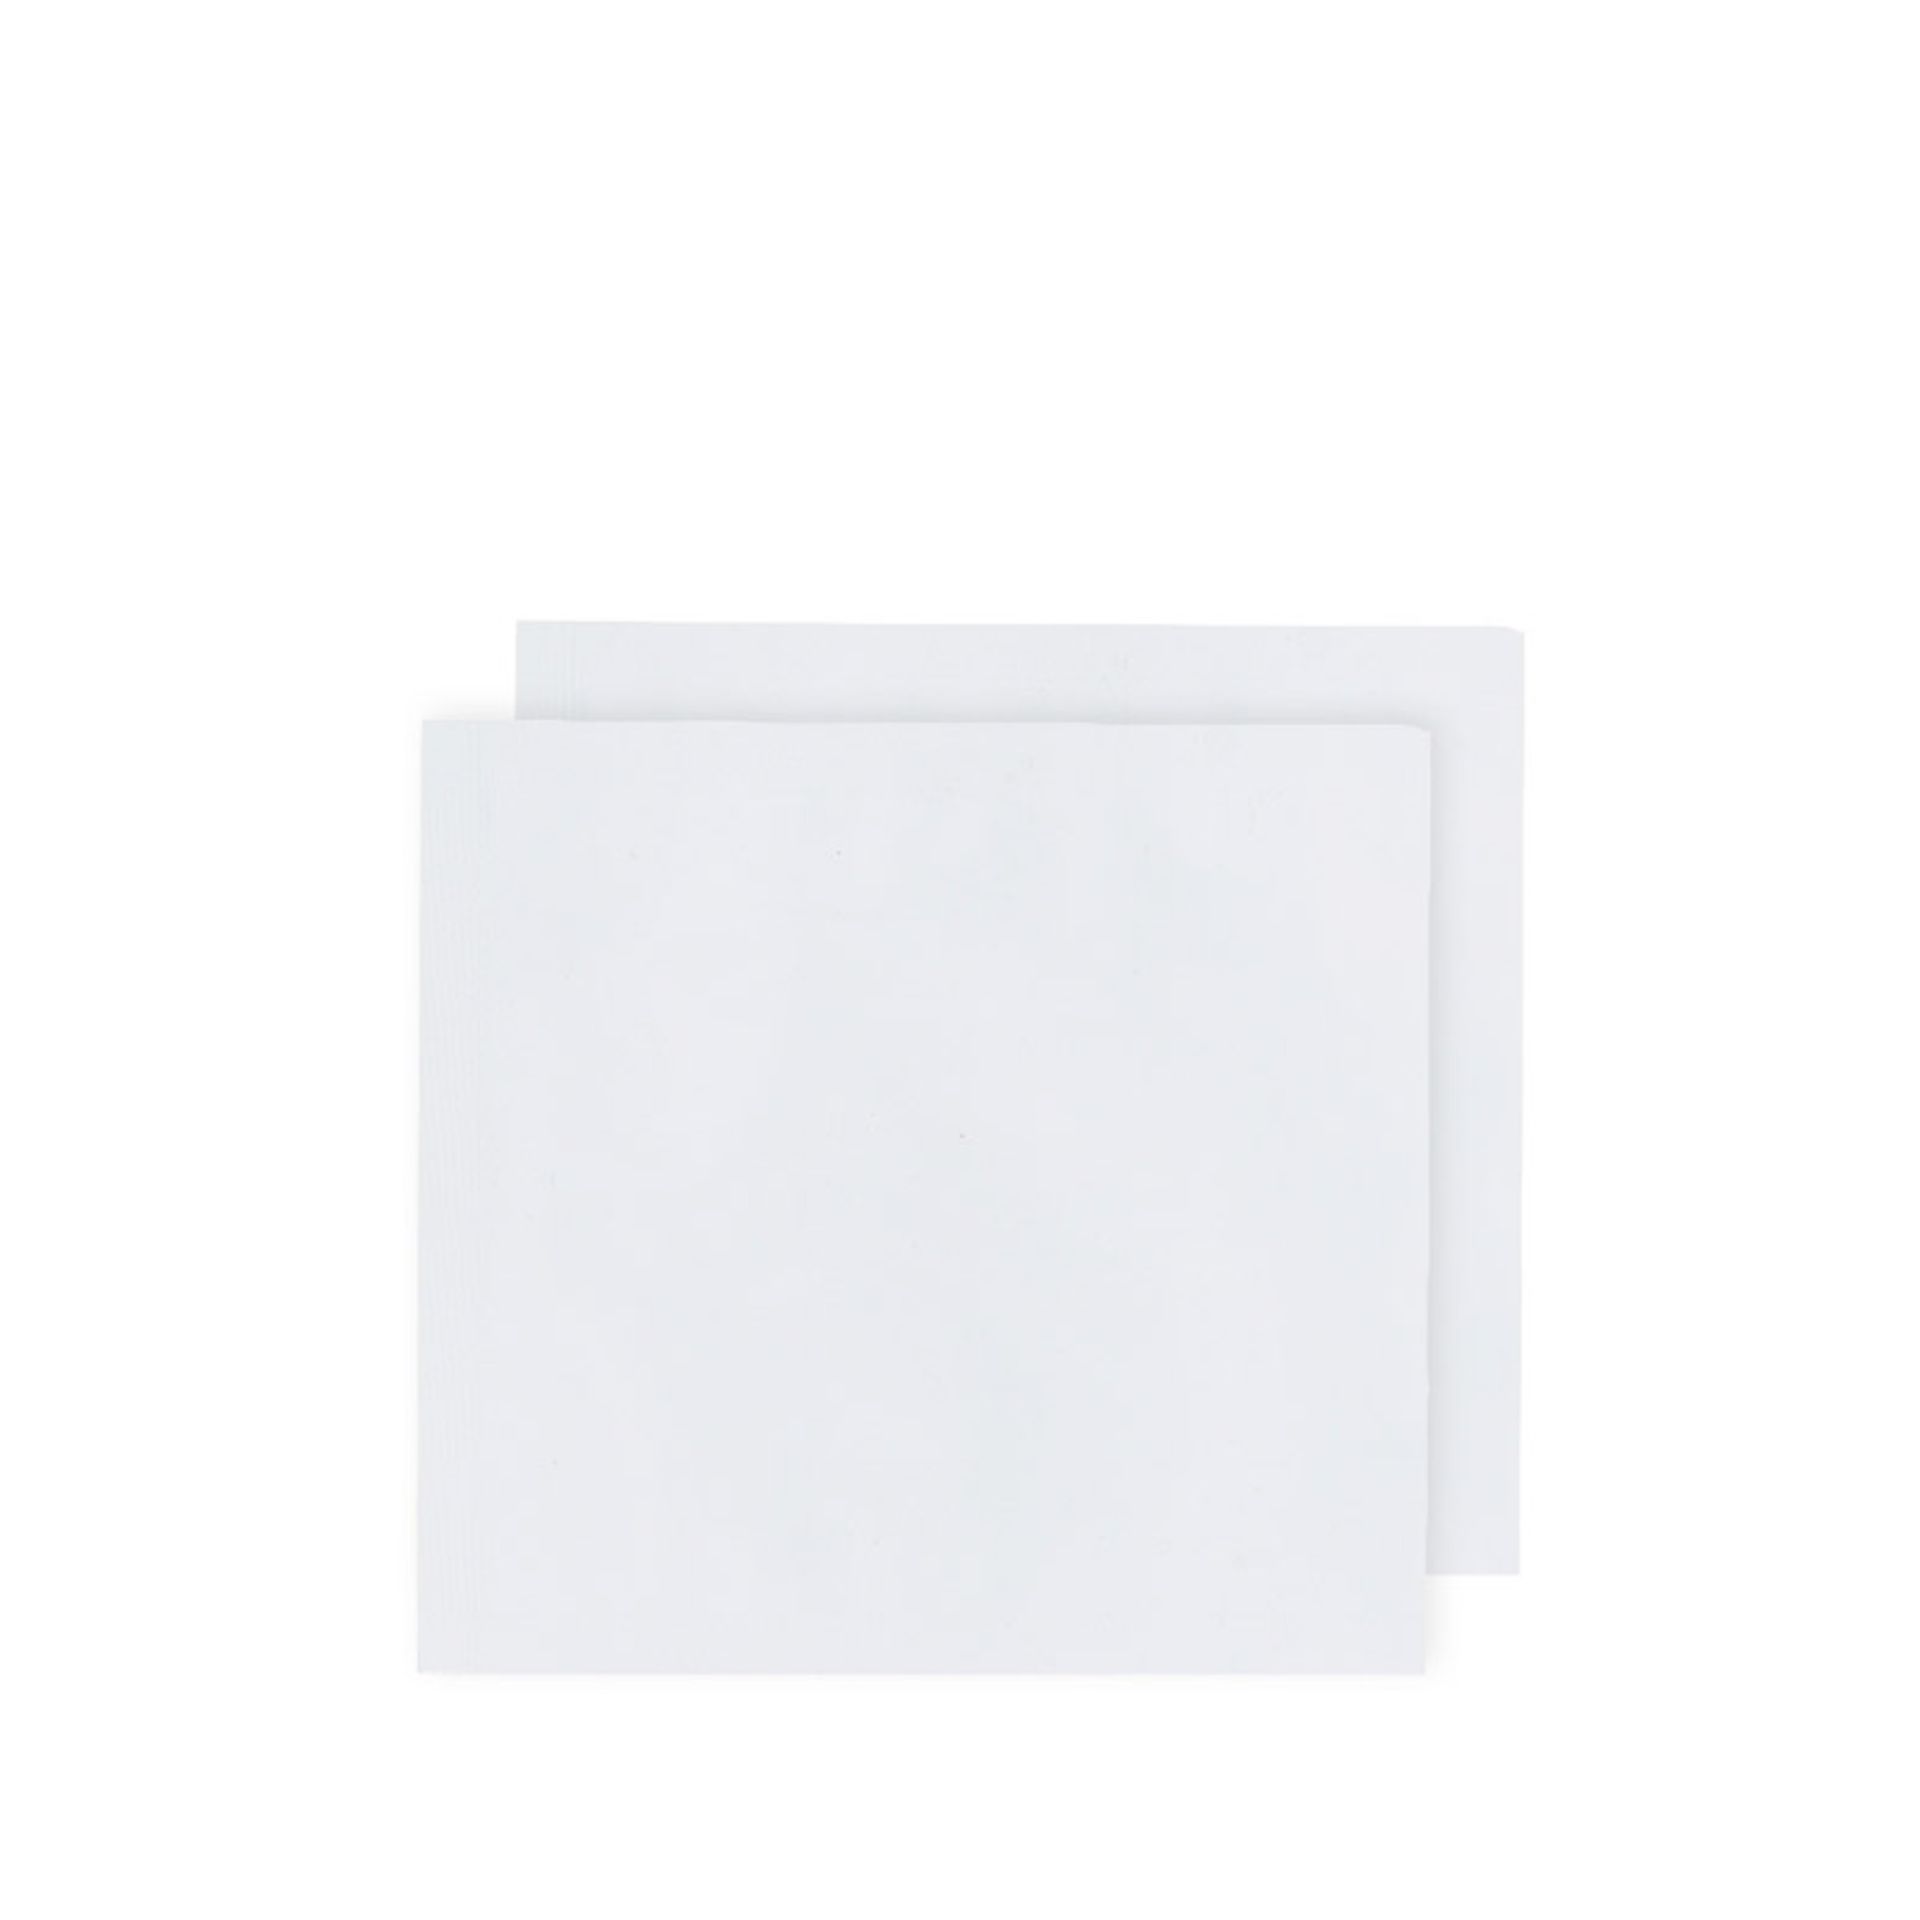 (Located in Moreno Valley, CA) 3.5 x 3.75" CR Single Serving Barrier Bag White/White, Qty 11,600